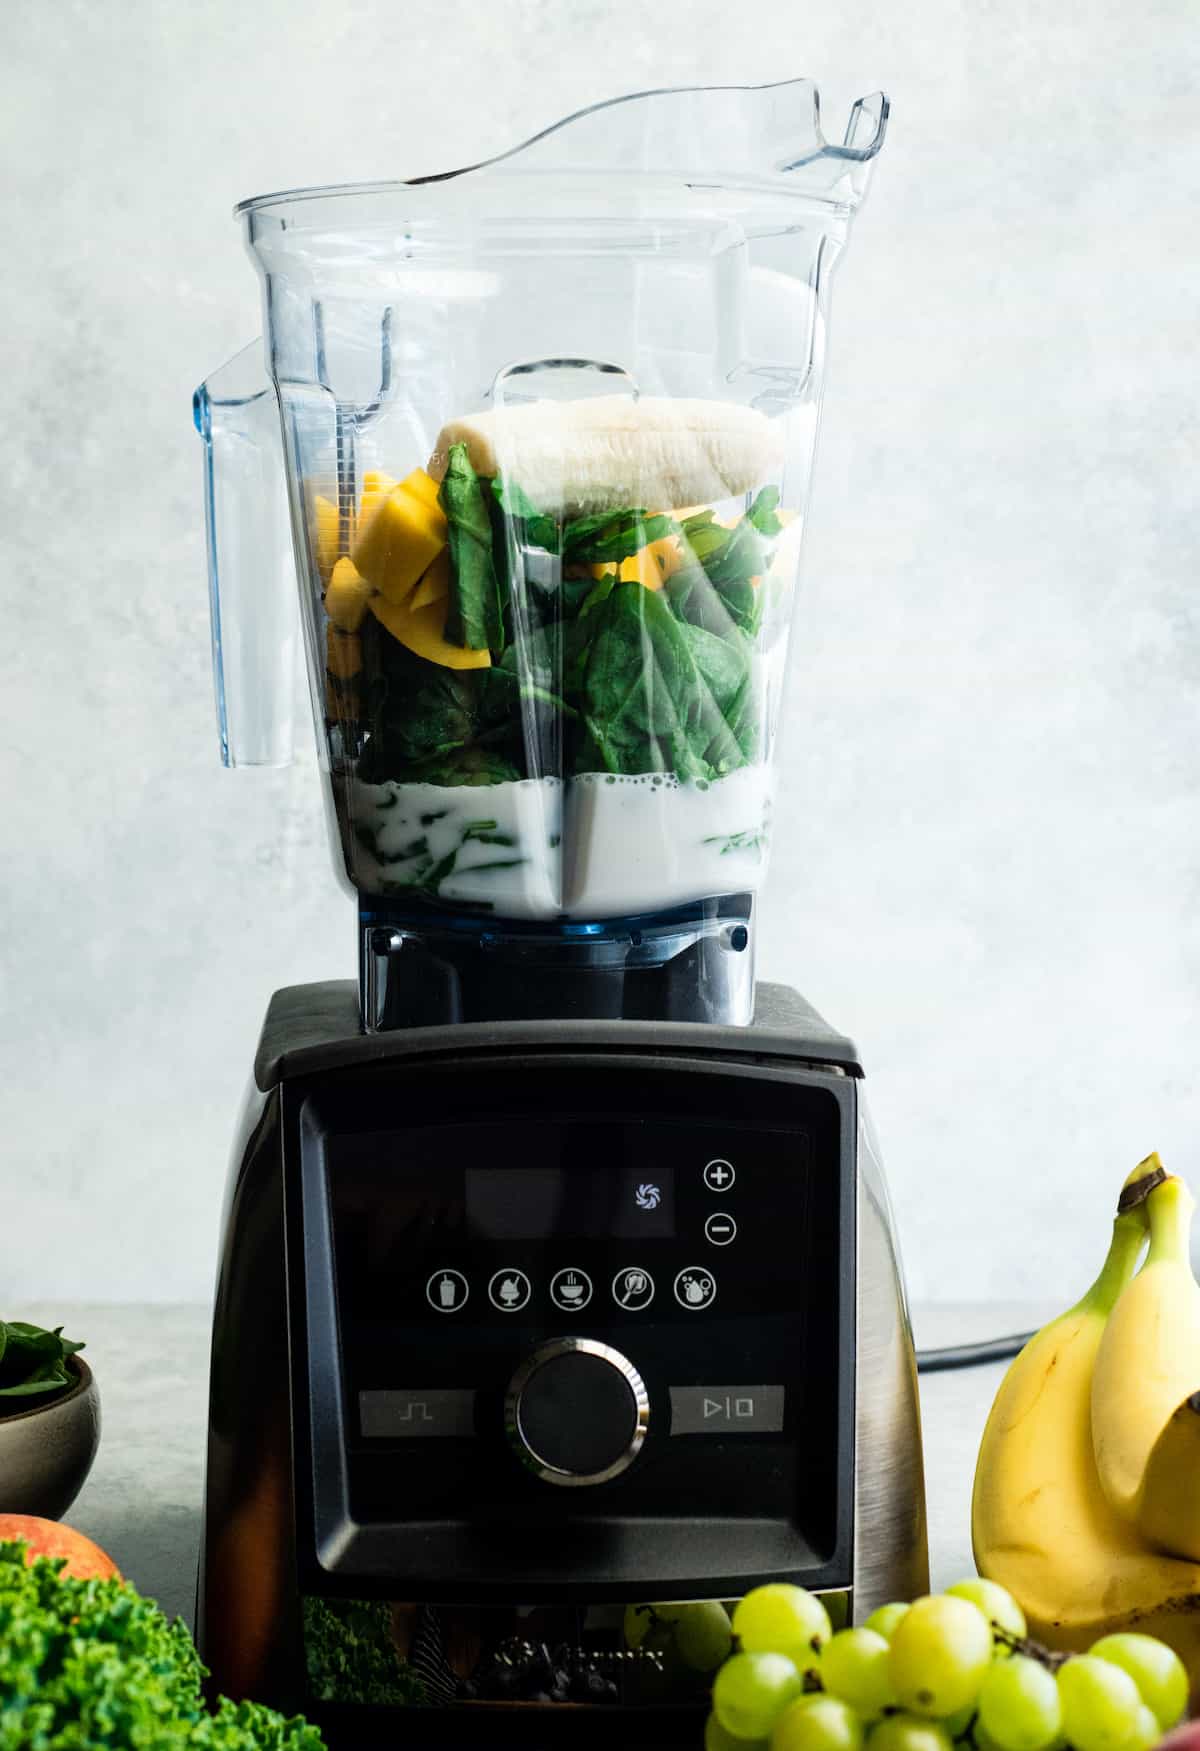 How to Make A Smoothie - ingredients in the blender before blending